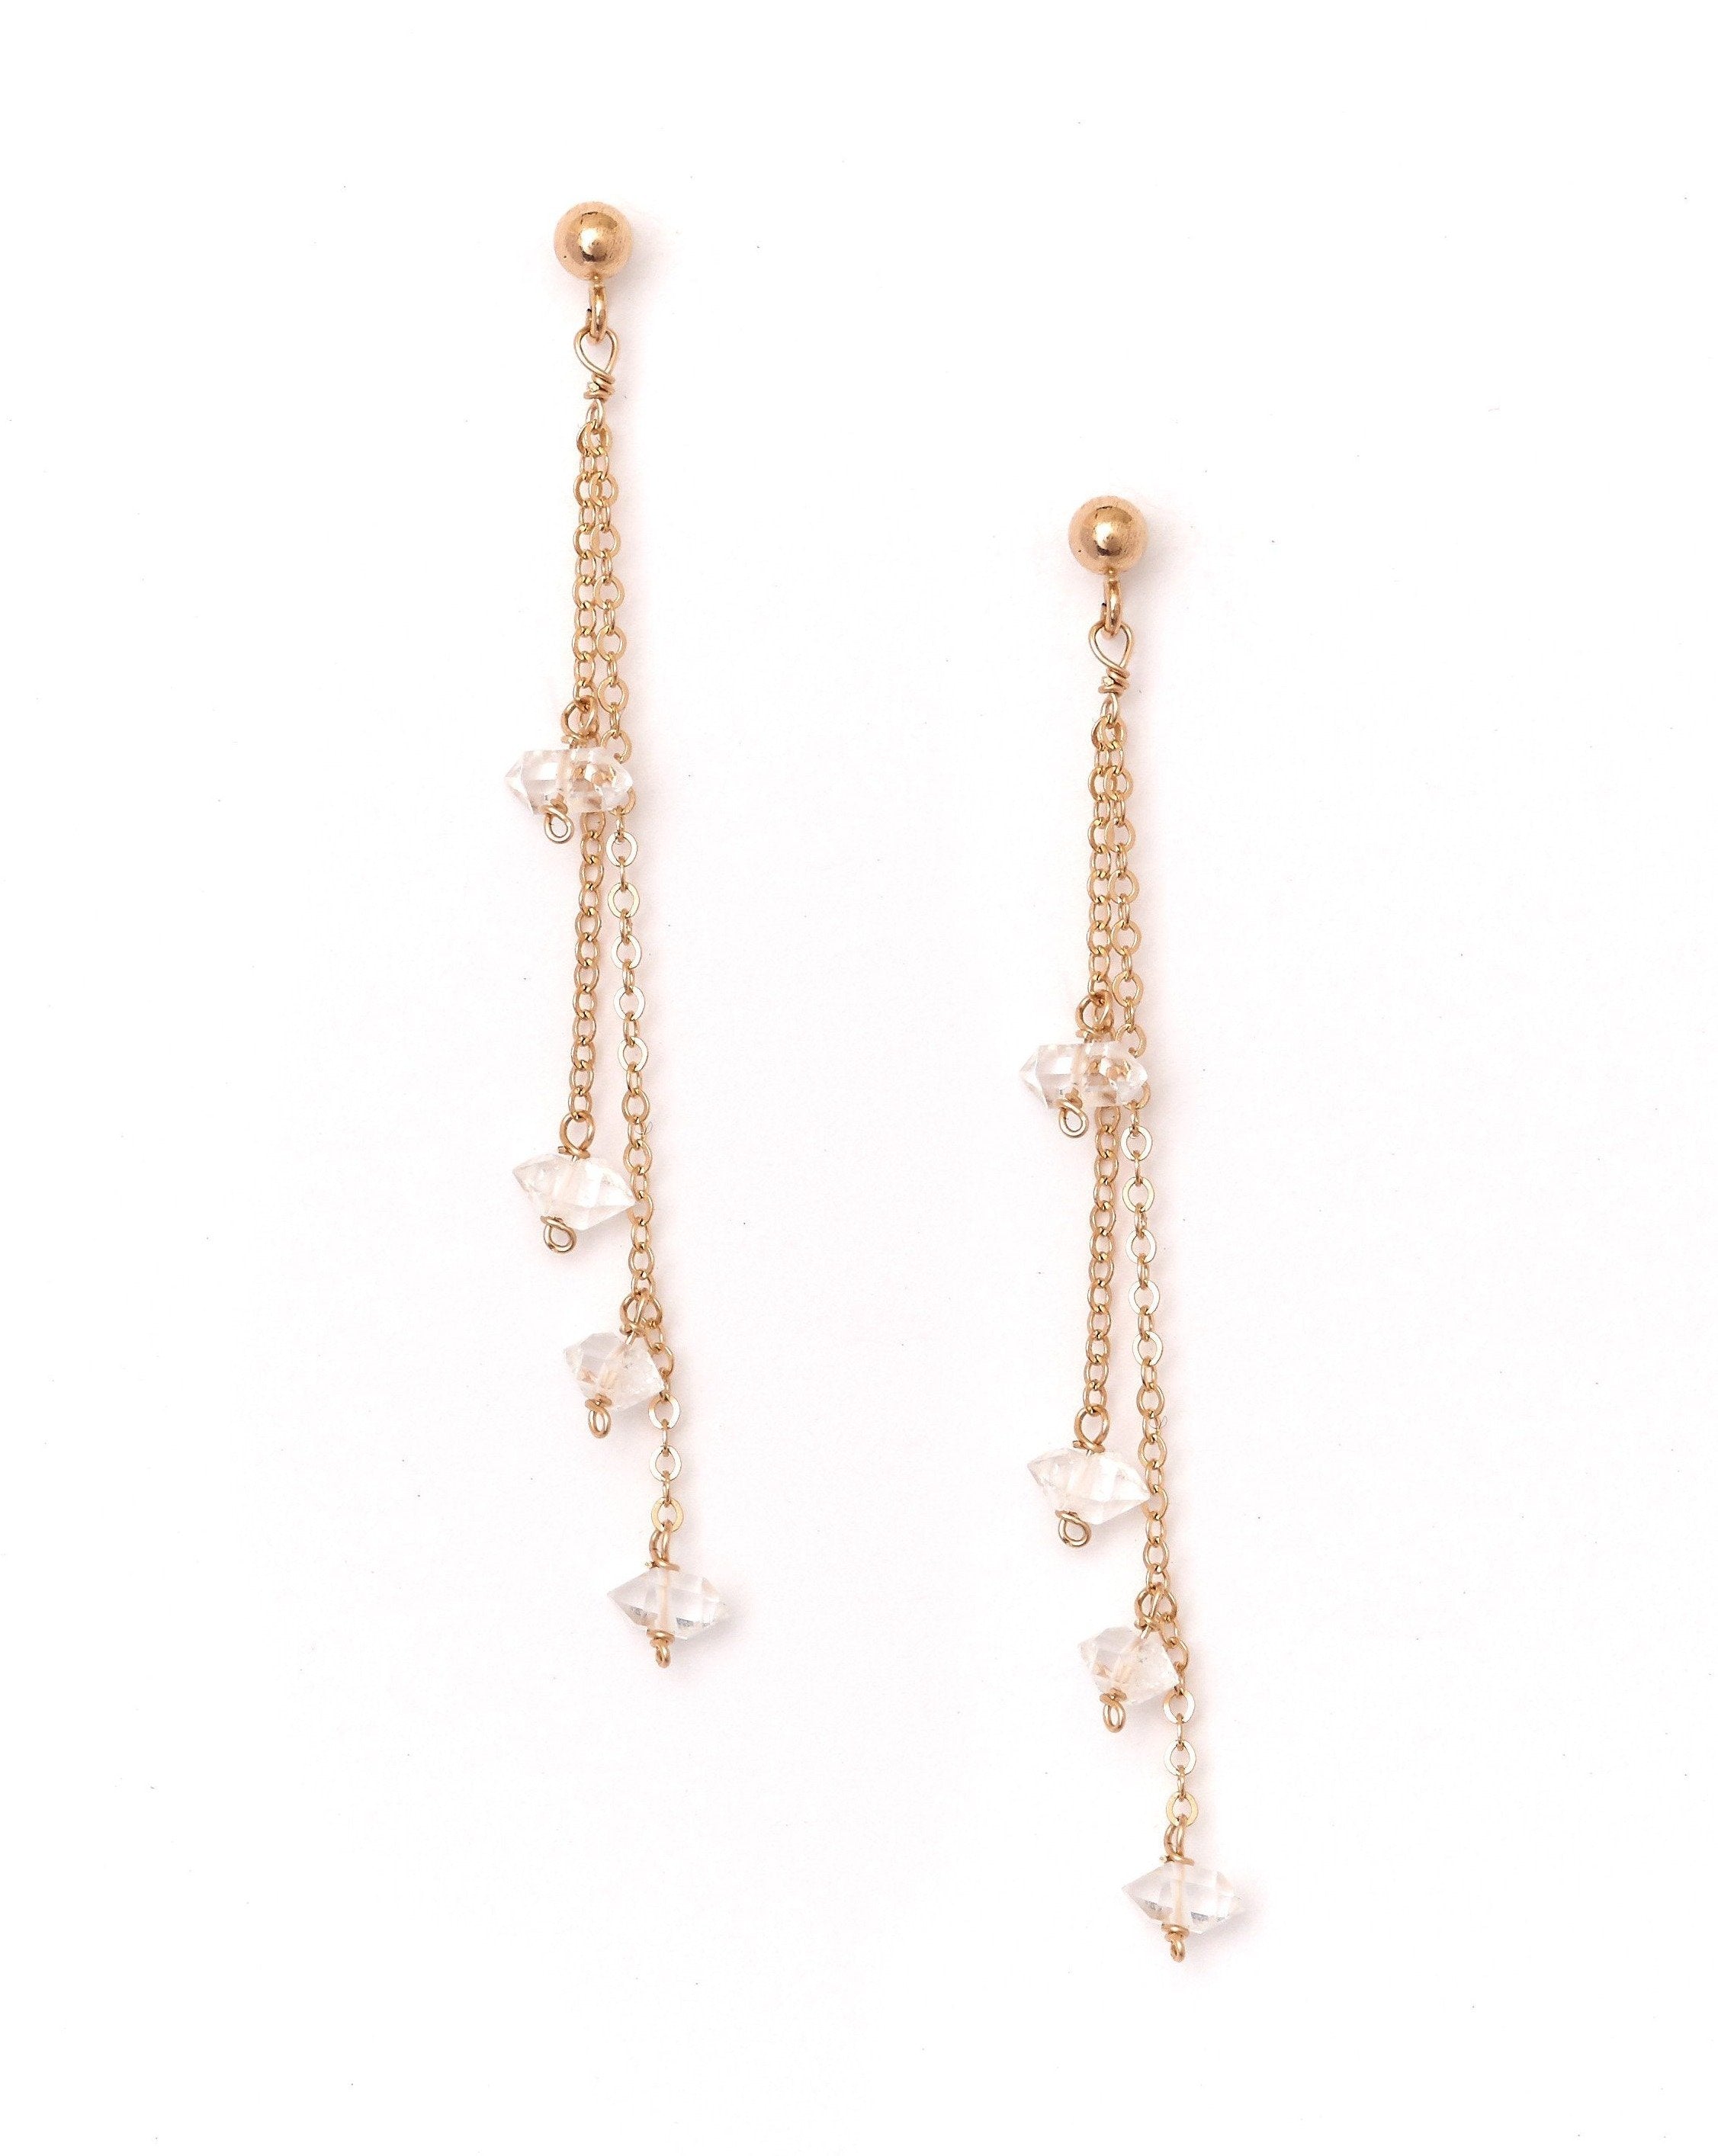 Rocio Herkimer Earrings by KOZAKH. 3mm Ball stud earrings with 1 1/2 inches long front drop, crafted in 14K Gold Filled, featuring Herkimer Diamonds.